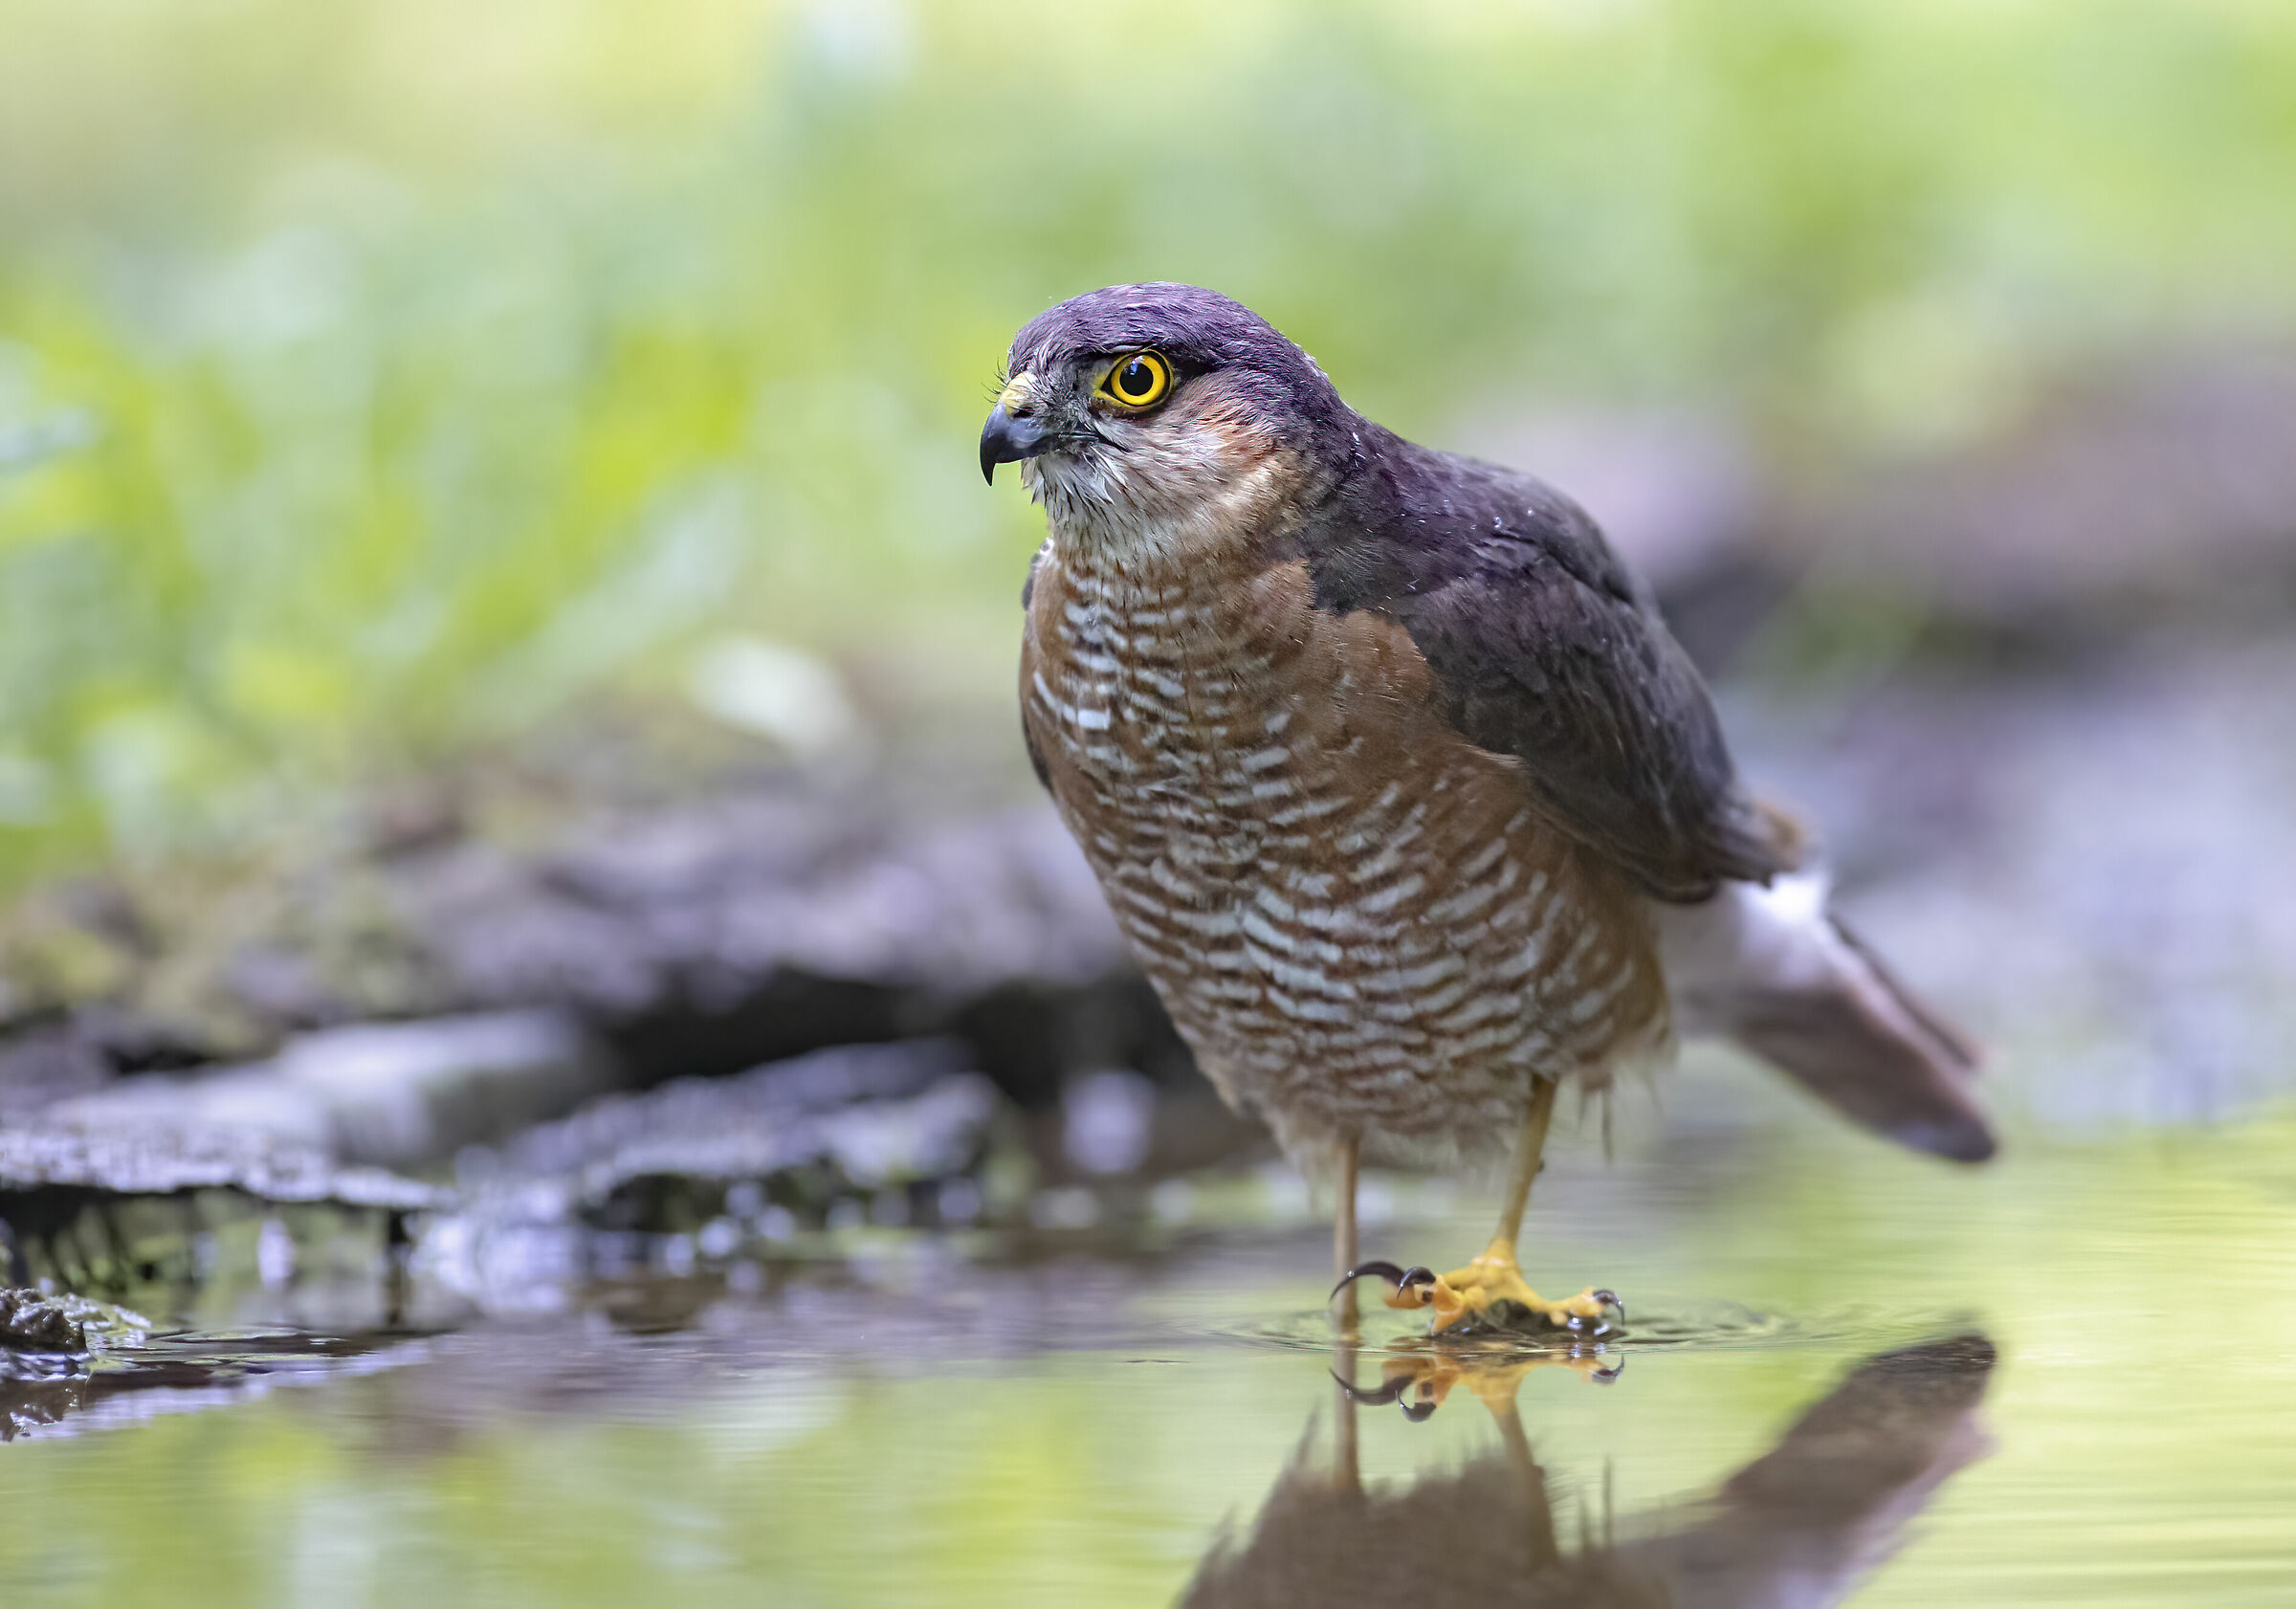 shallow waters for the sparrowhawk...